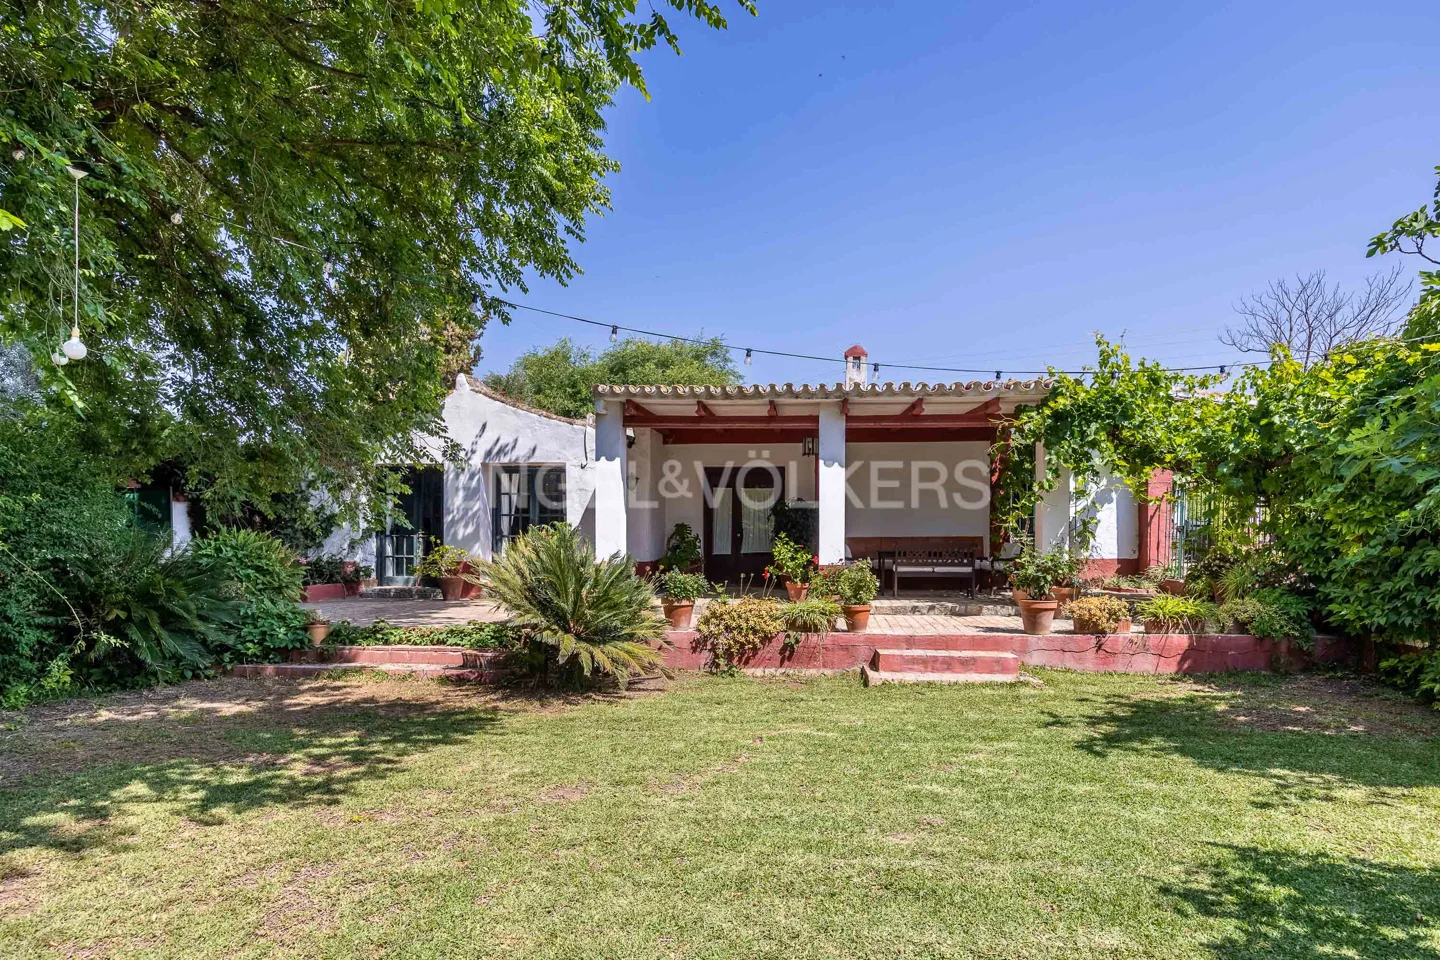 Equestrian farm with easy access less than 30 minutes from the centre of Seville, surrounded by nature.